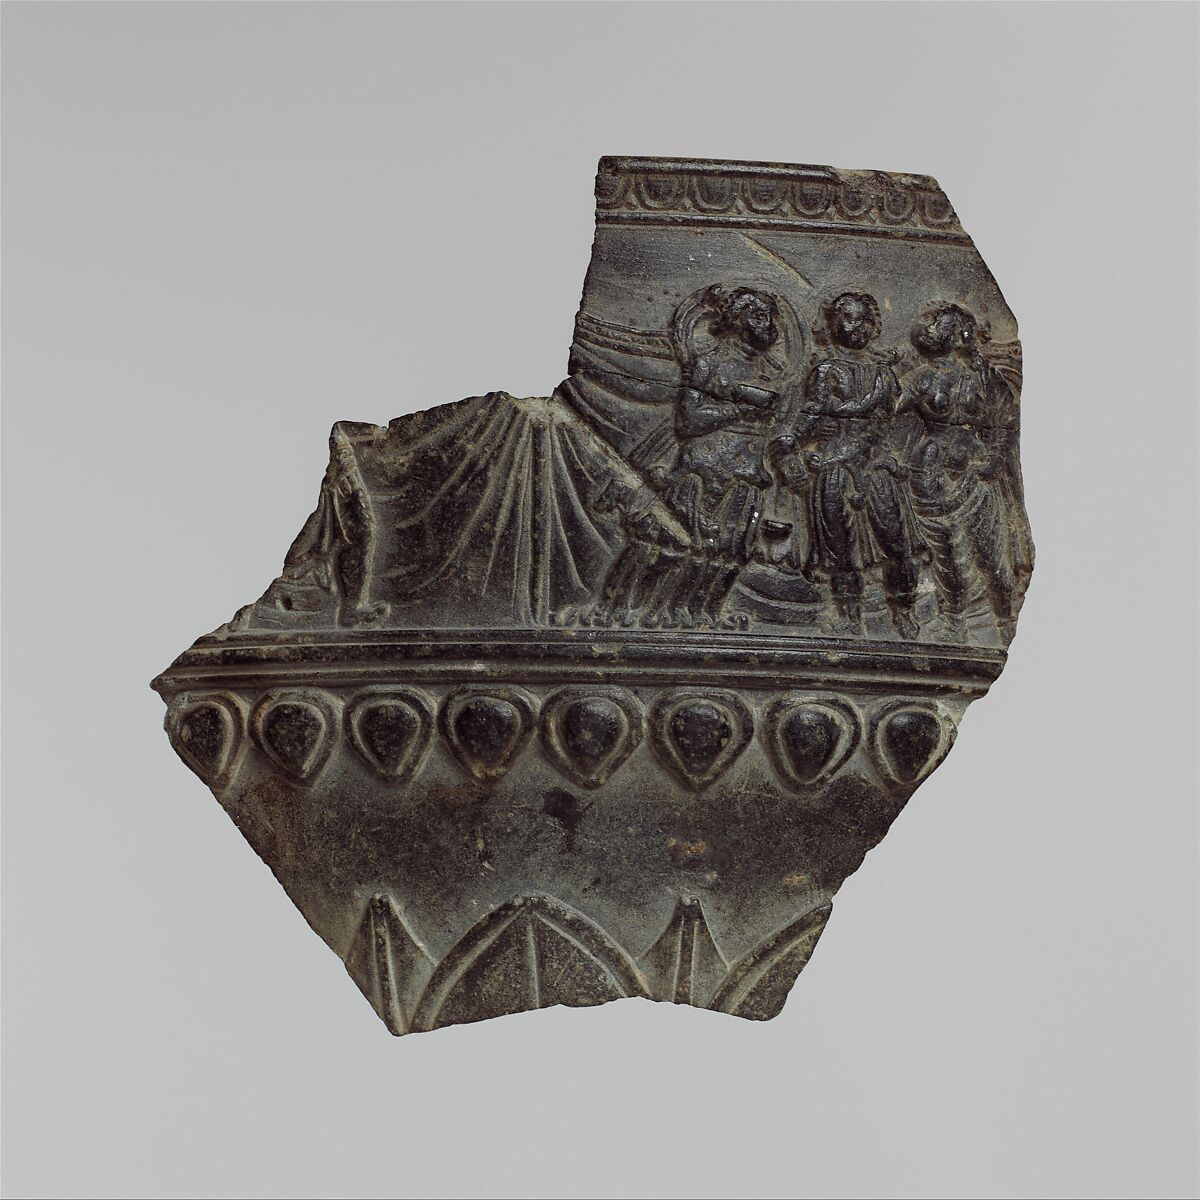 Fragment of a Vessel with a Dionysian Scene, Schist, Pakistan (ancient region of Gandhara) 